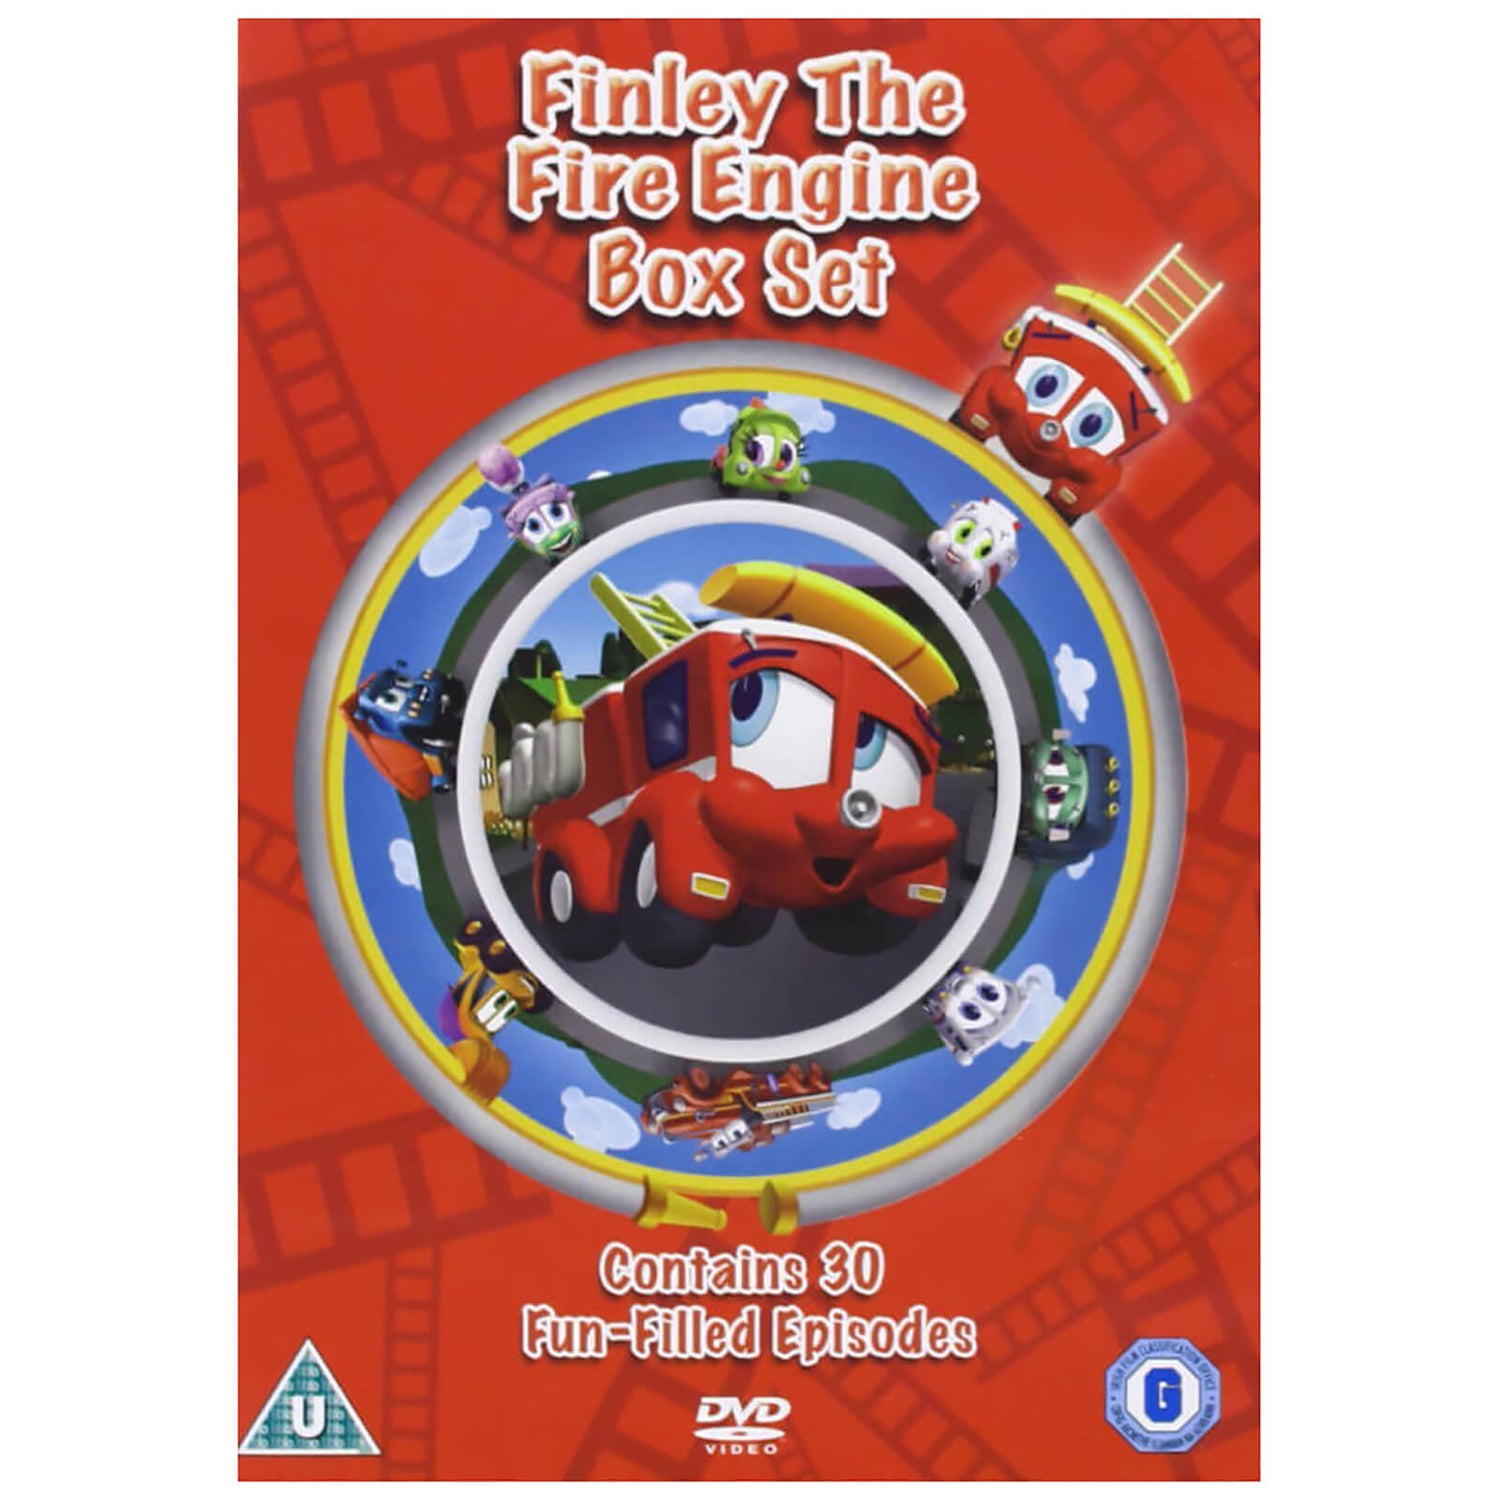 Finley the Fire Engine - Volumes 1-3